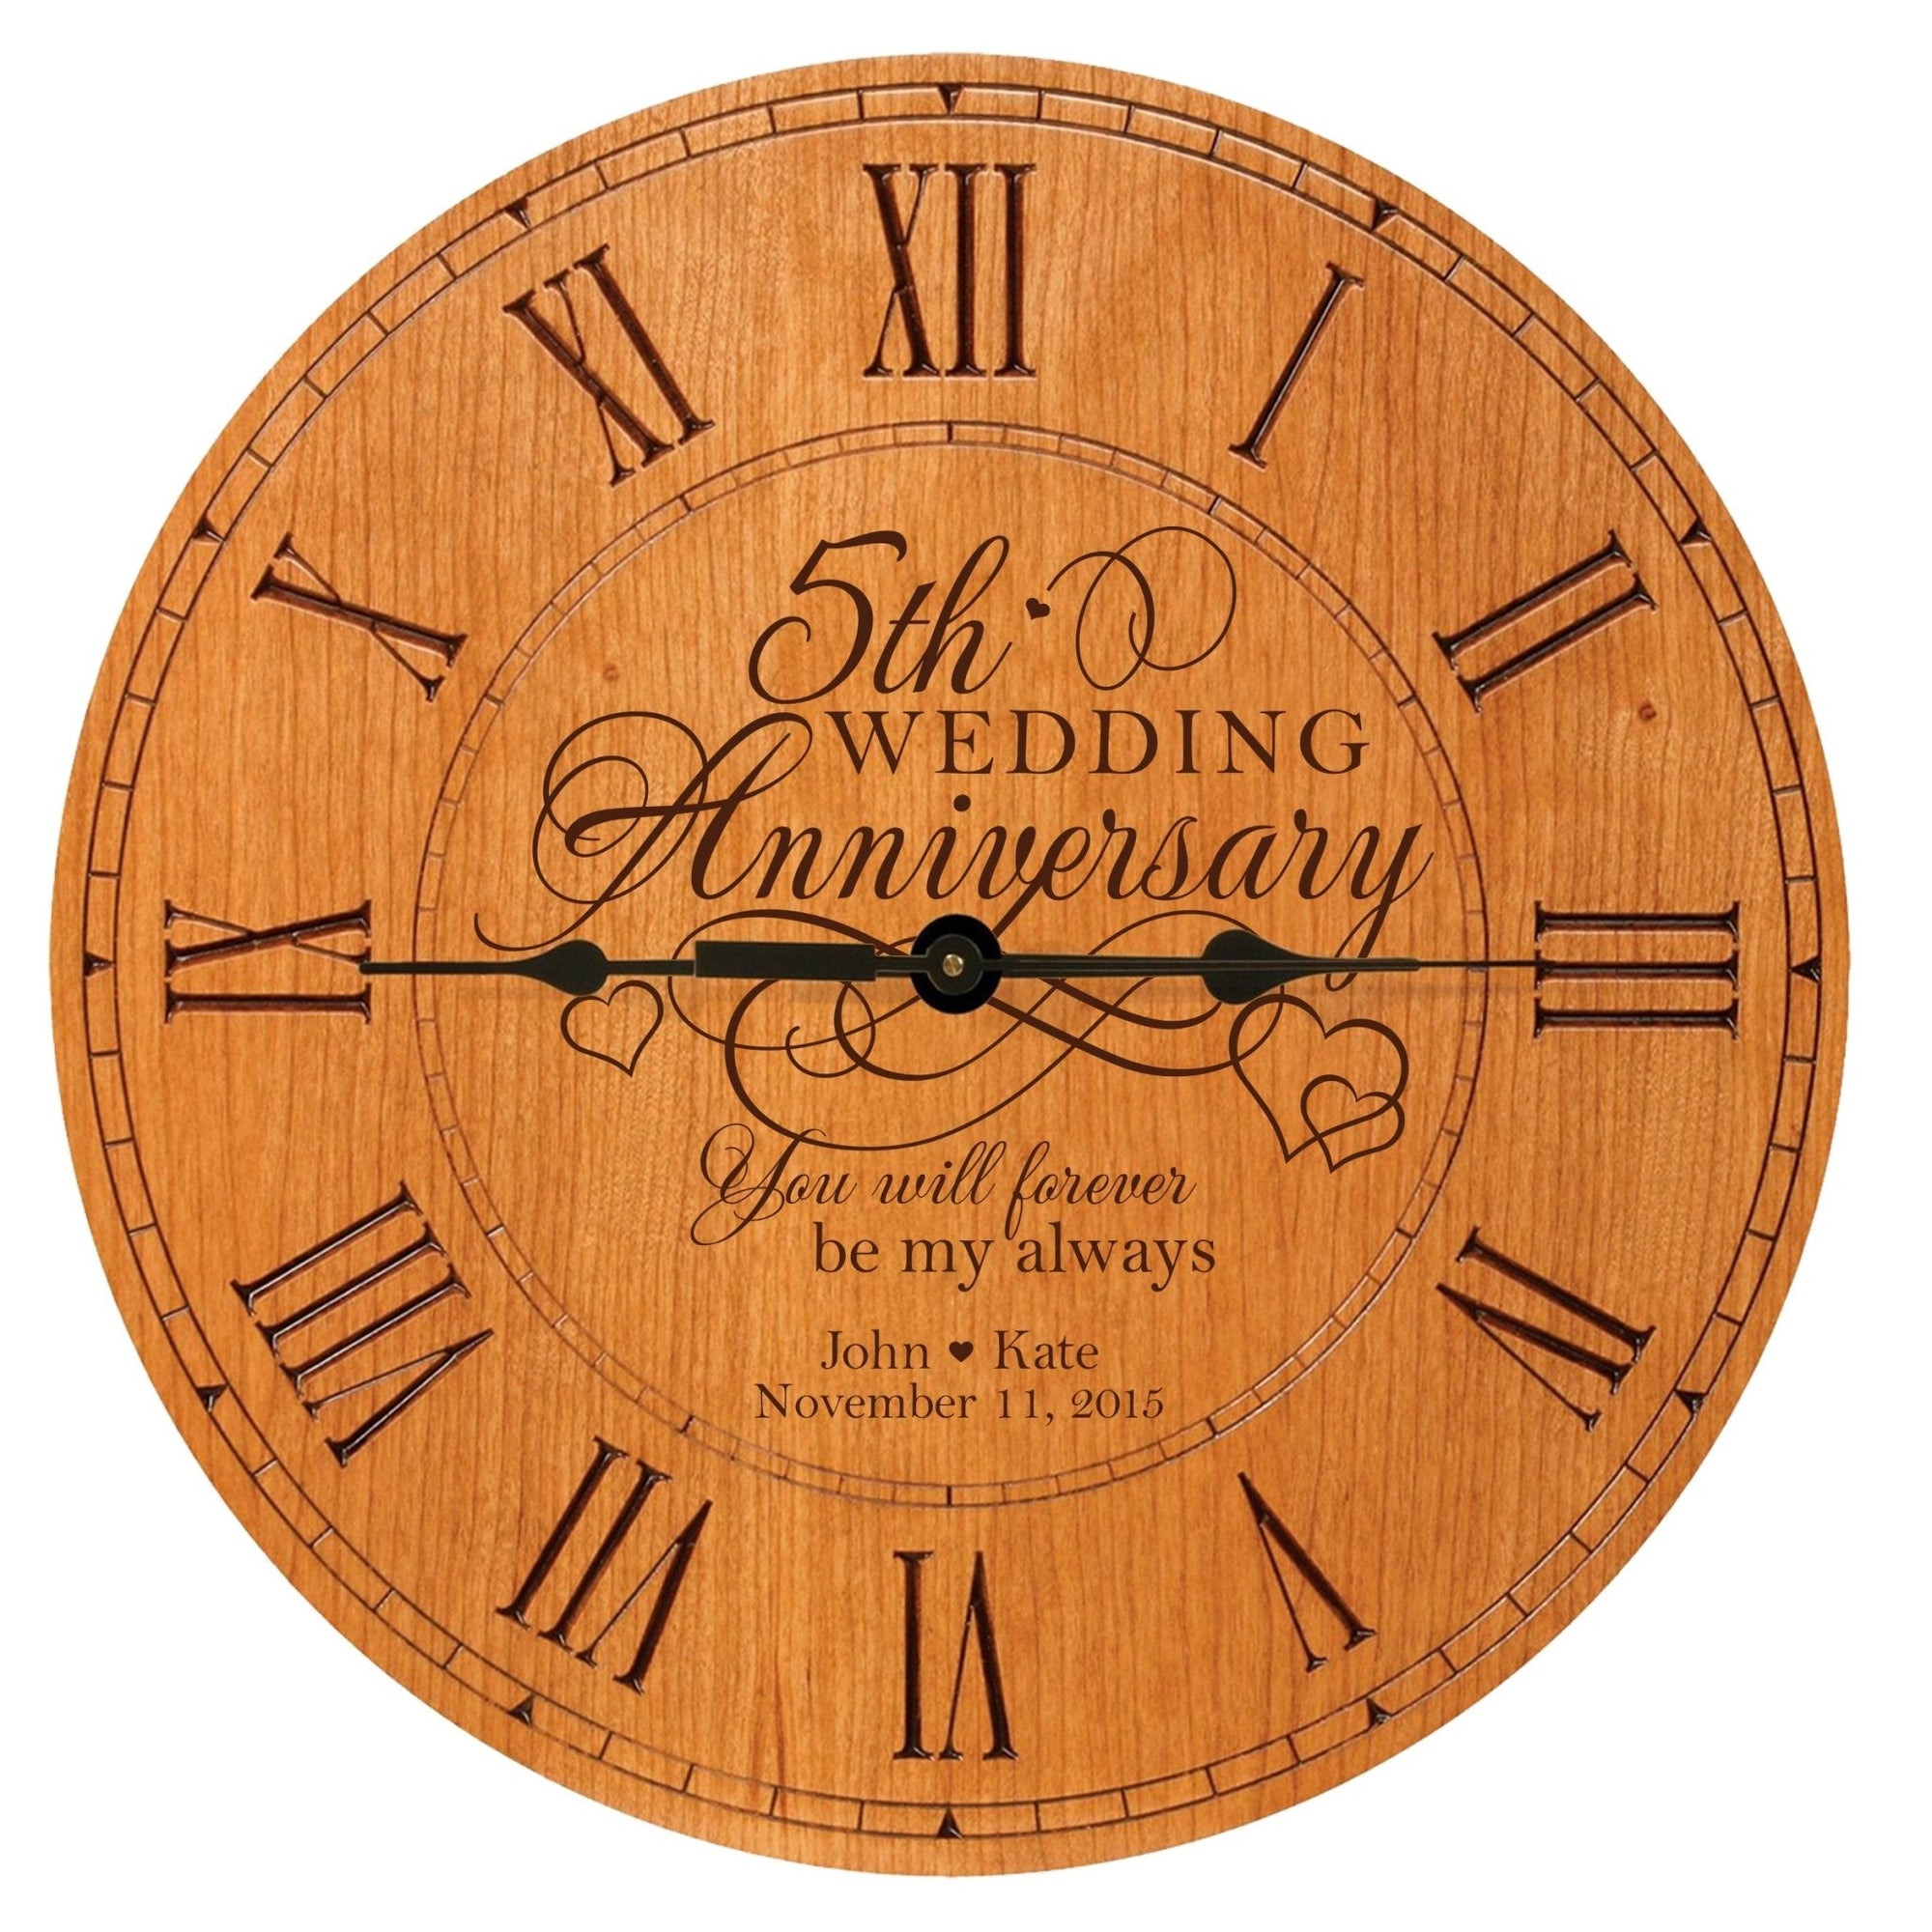 LifeSong Milestones Personalized Engraved Wooden Wall Clock for 5th Wedding Anniversary Gift Ideas